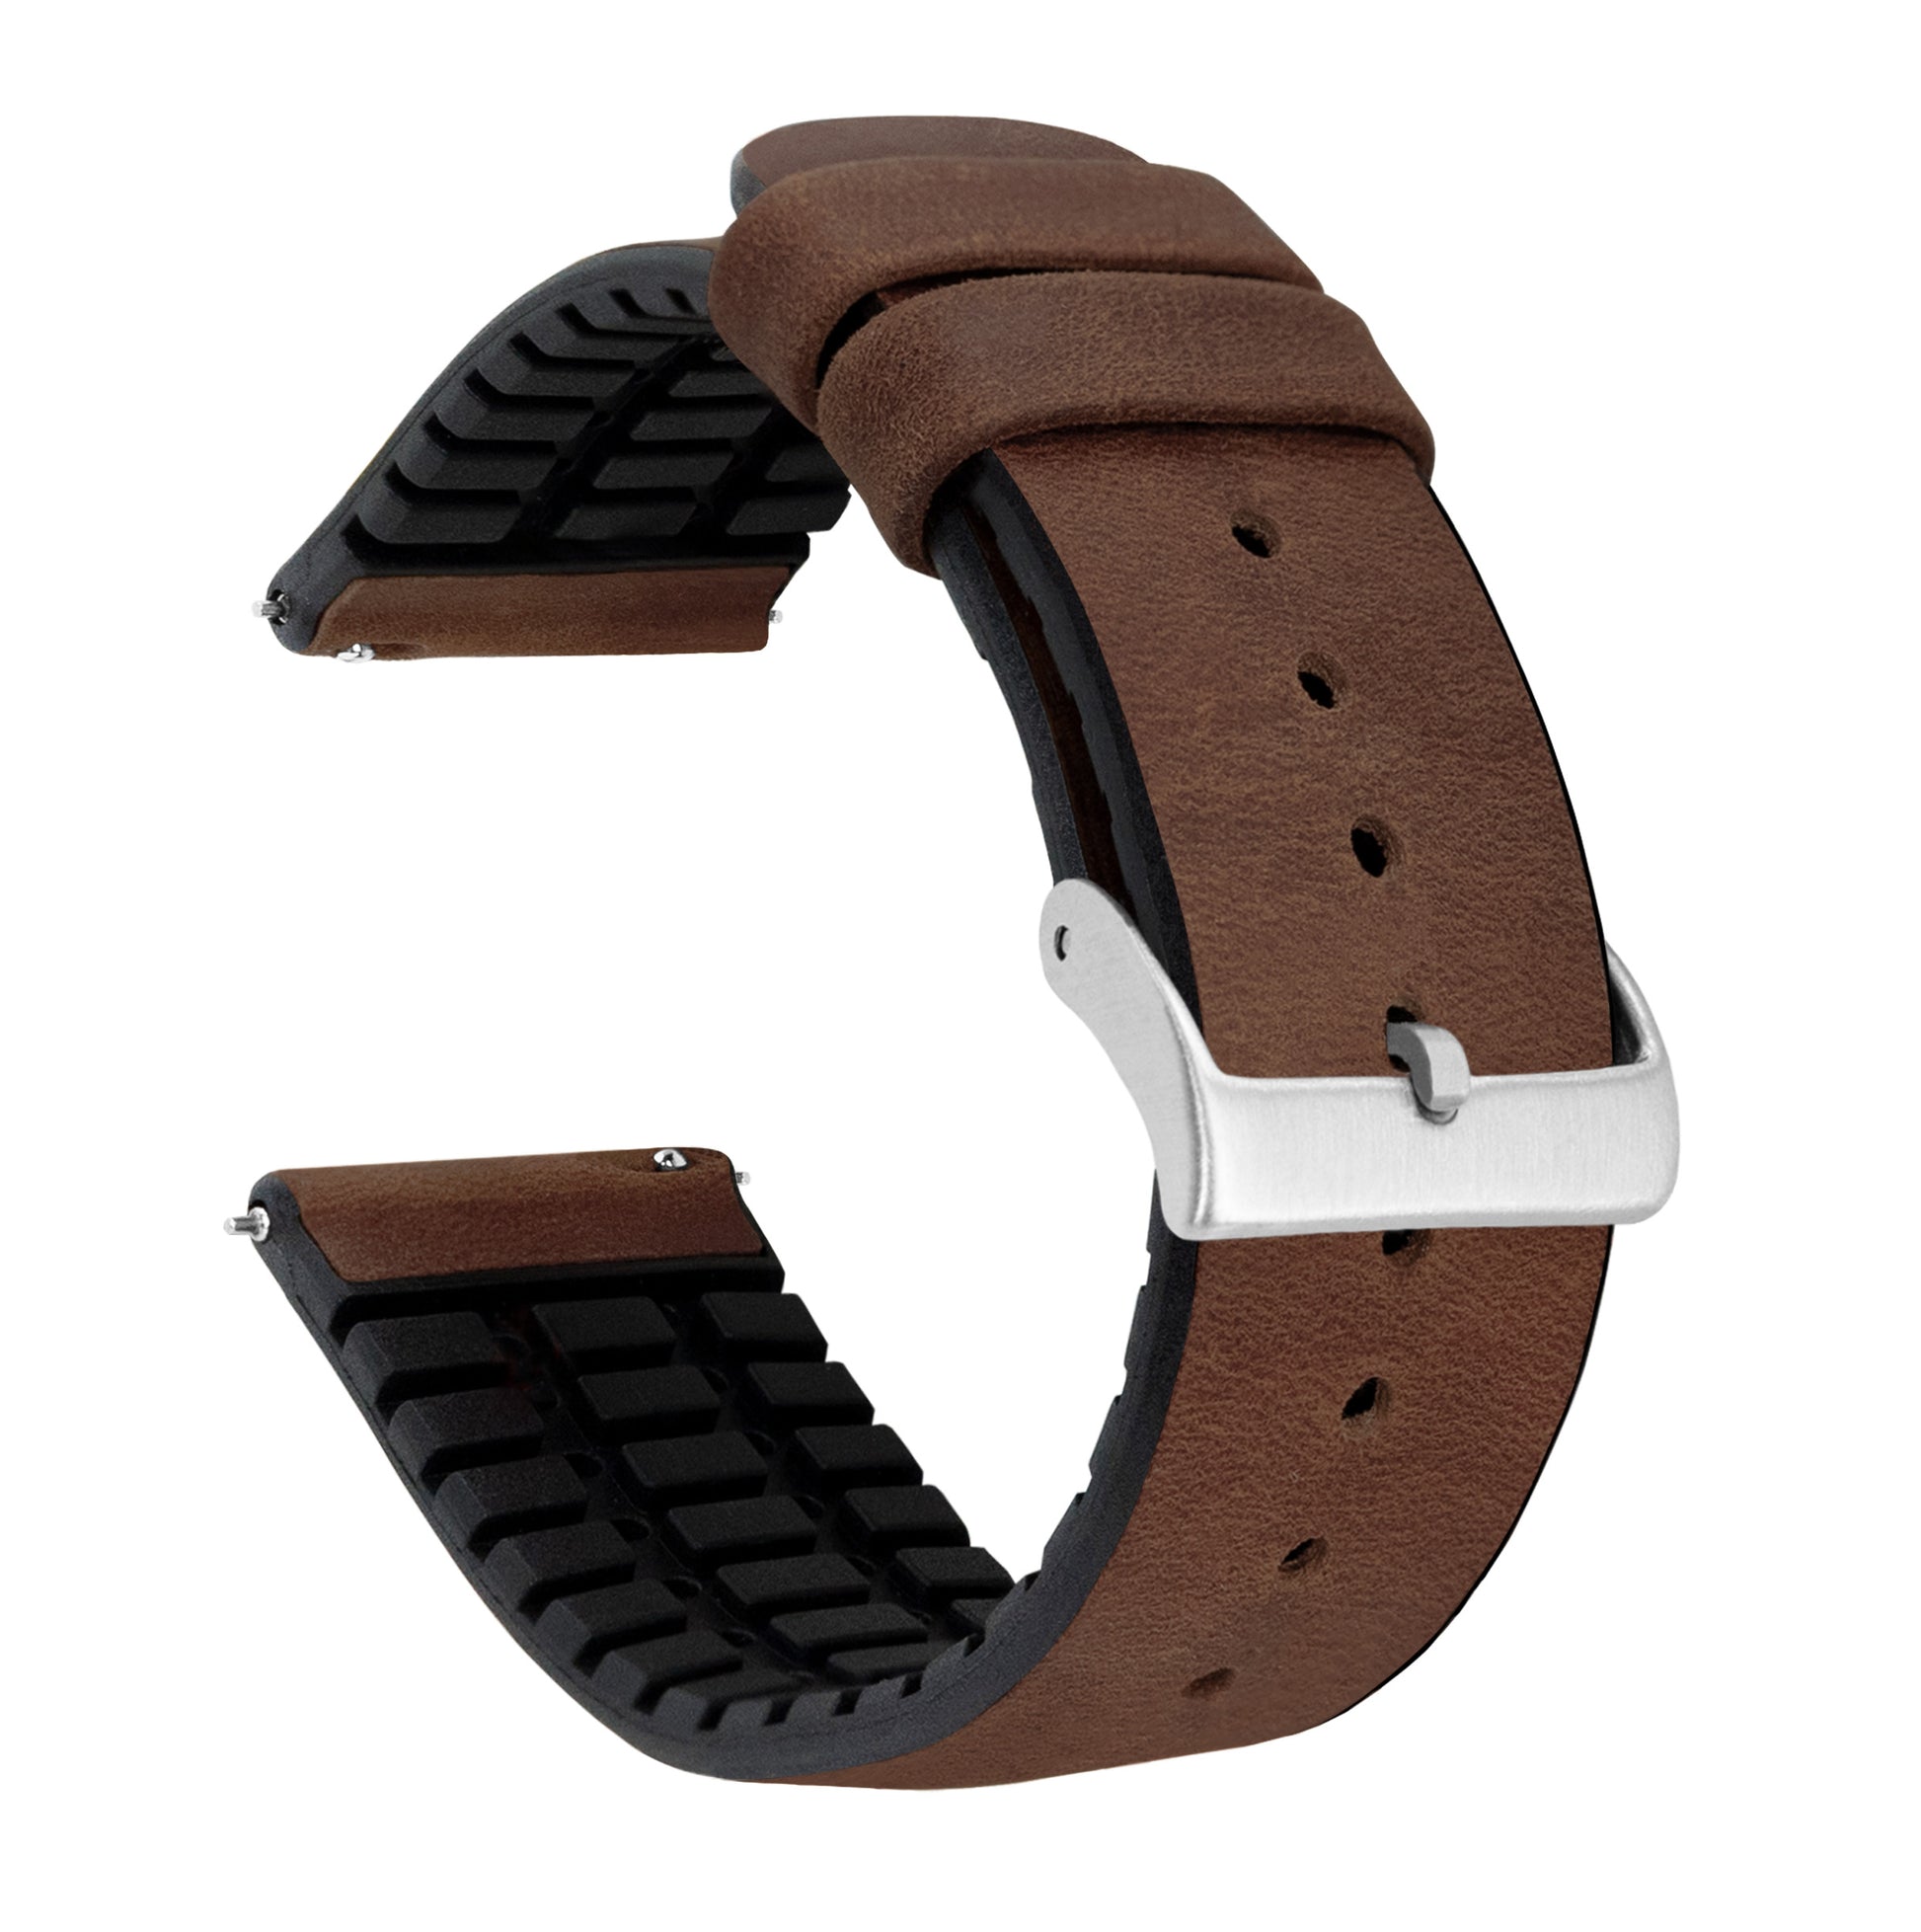 Fossil Sport | Leather and Rubber Hybrid | Walnut Brown - Barton Watch Bands